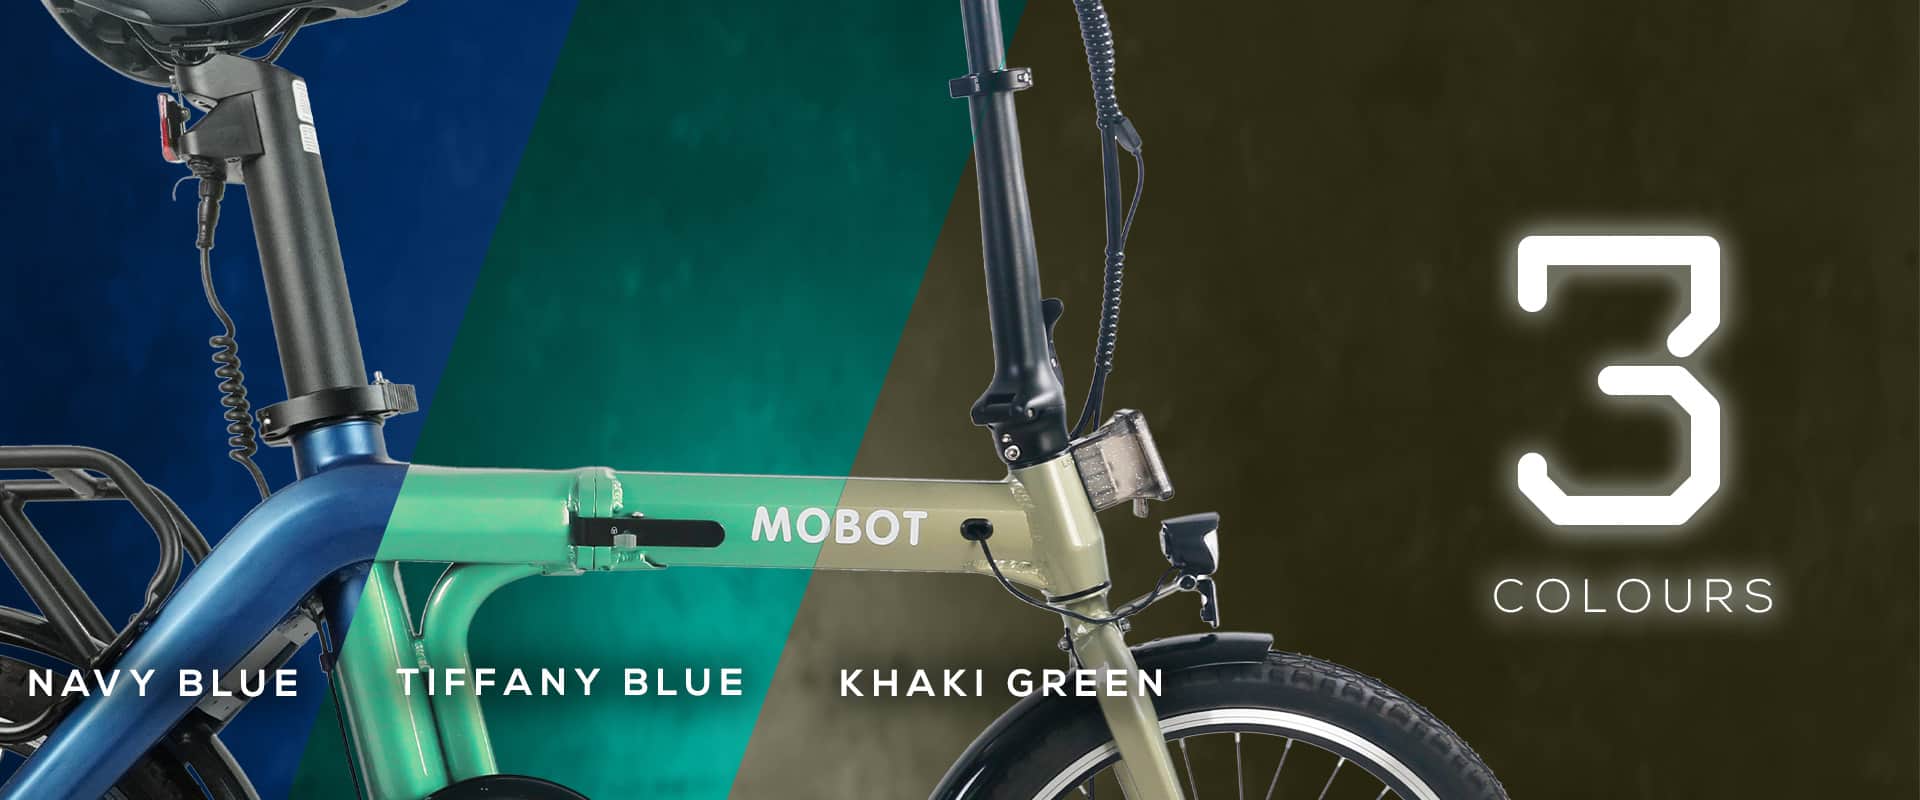 ExtraContent_MOBOT S3 LTA approved electric bicycle colours_5